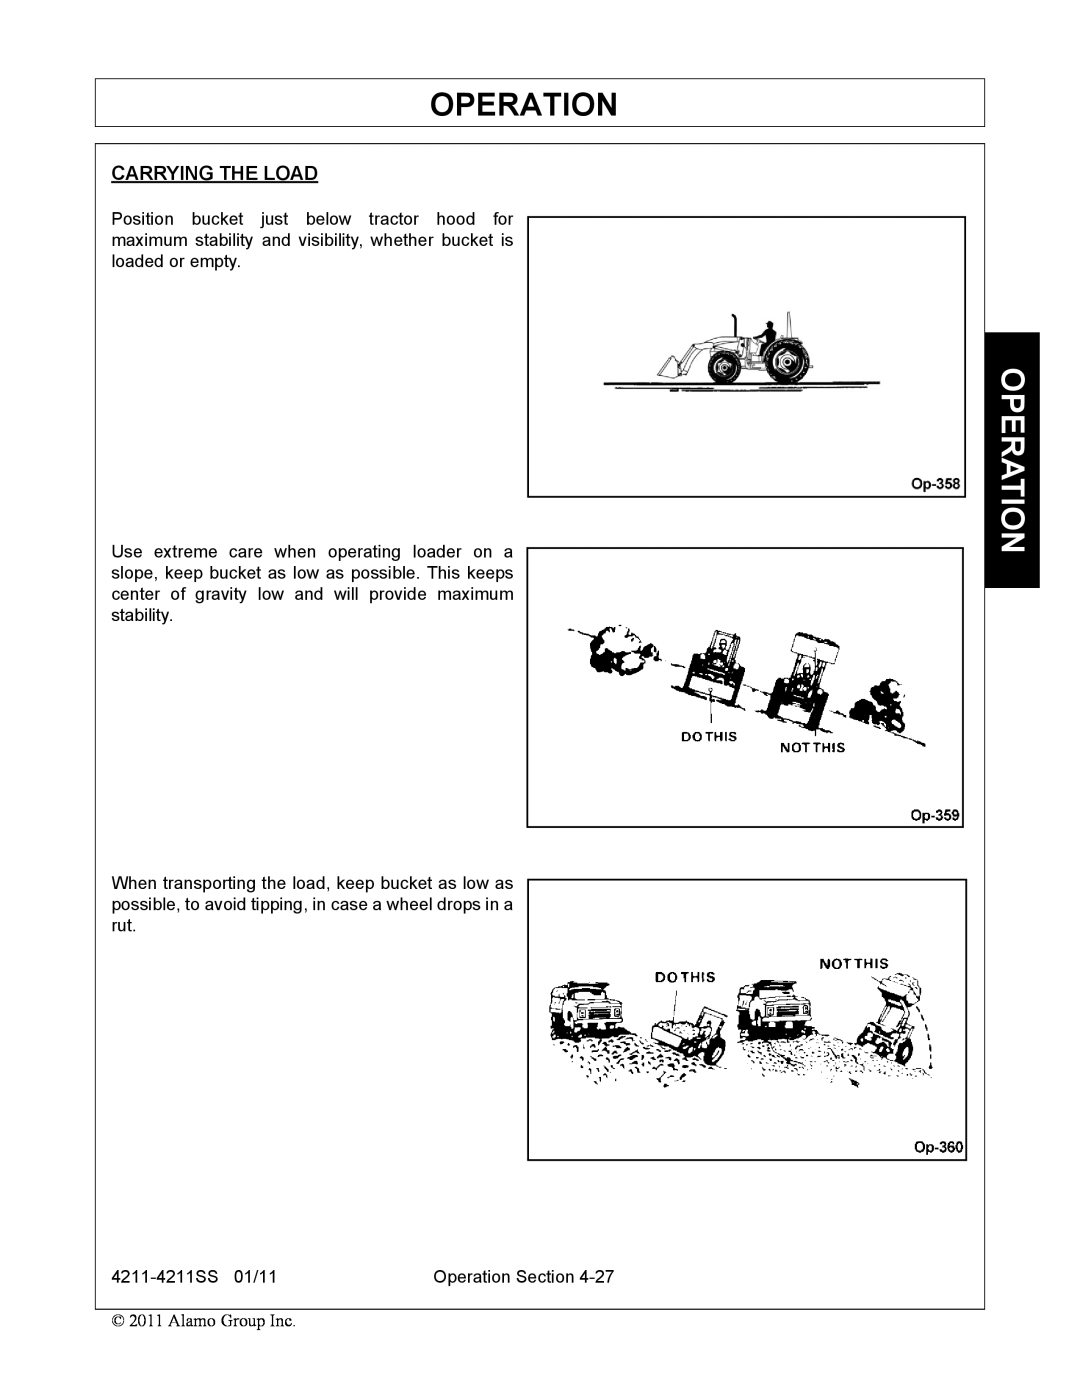 Servis-Rhino 4211SS manual Operation, Carrying The Load 